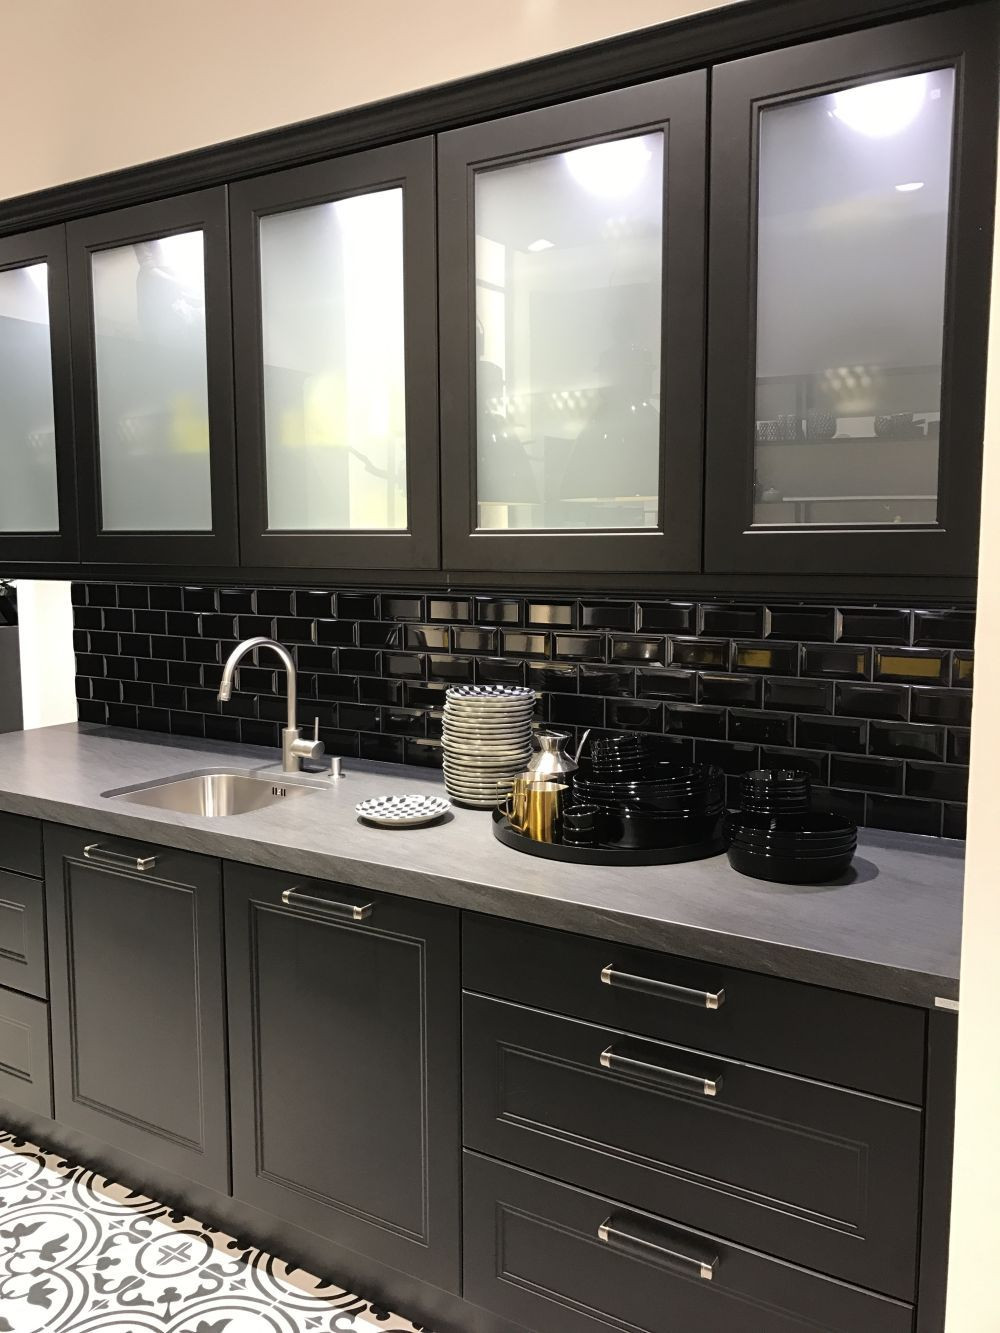 White Kitchen Cabinet Glass Doors
 Black kitchen cabinets with subway tiles and white frosted